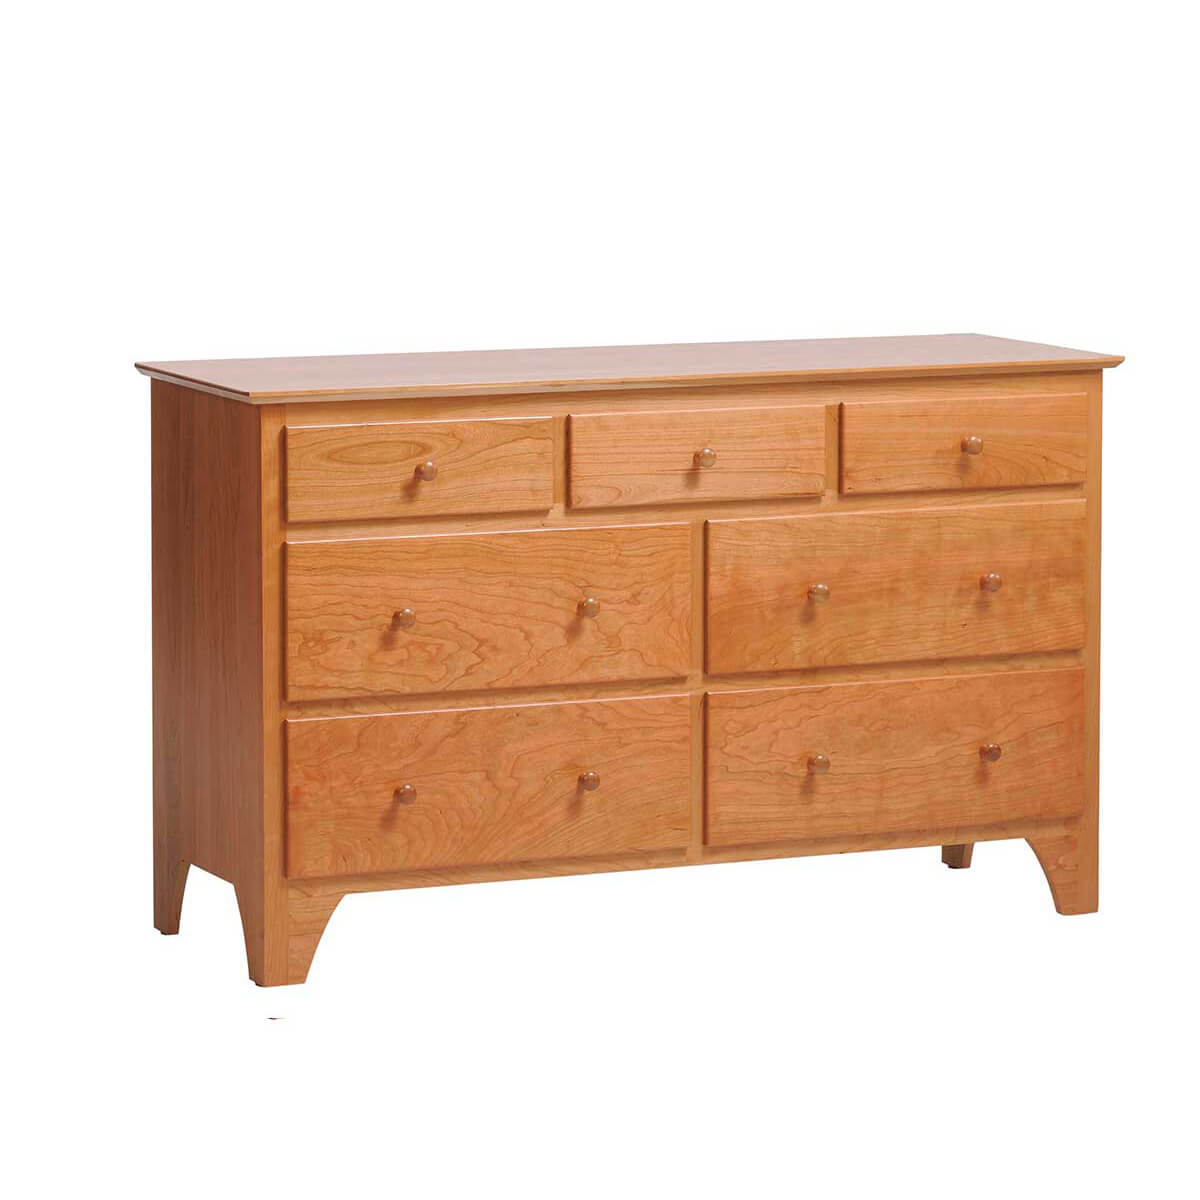 Read more about the article Shaker Village Dresser